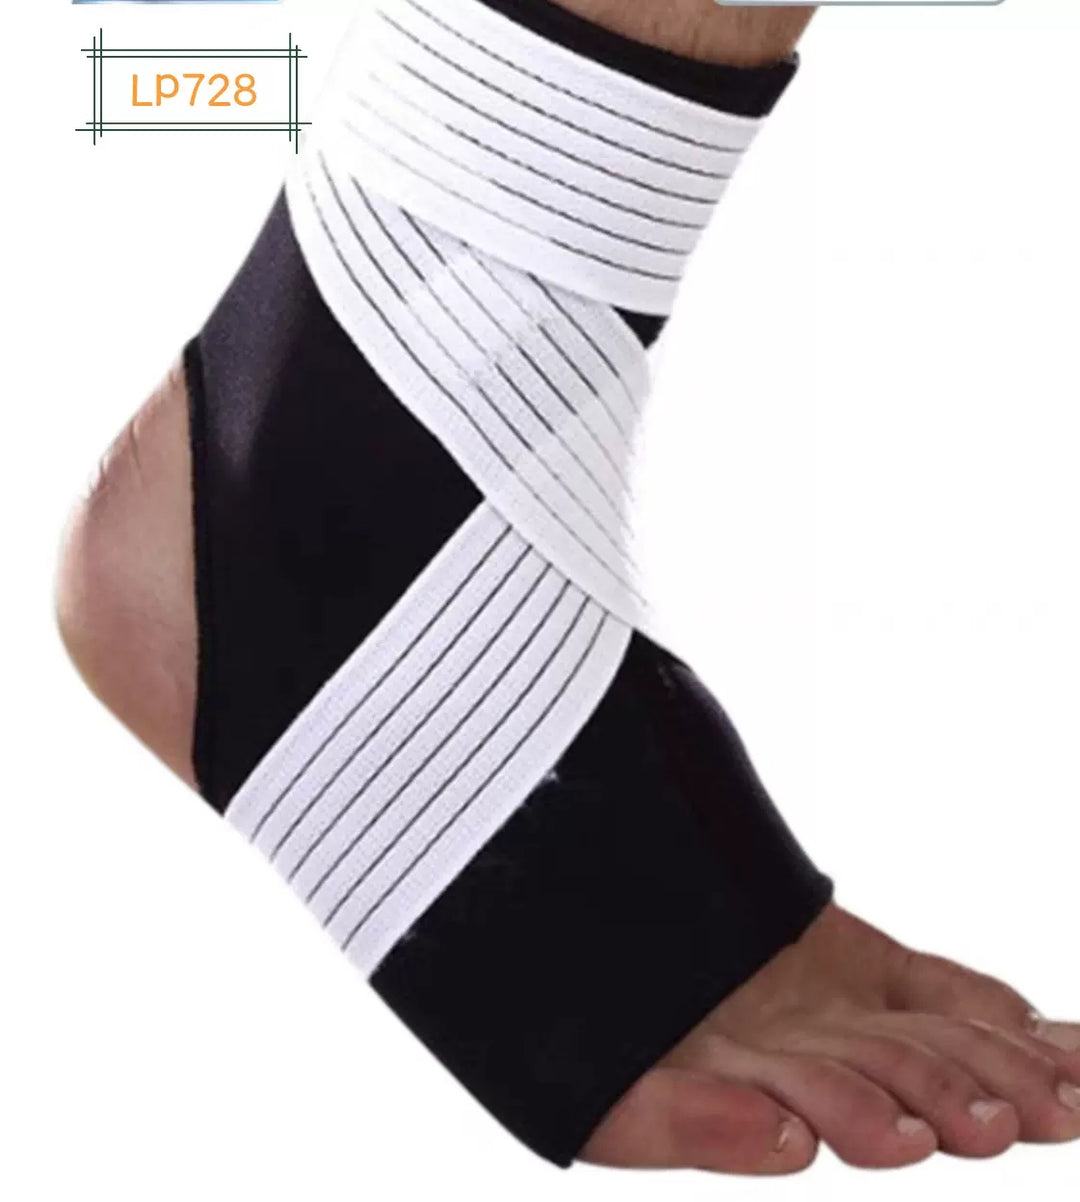 LP Ankle Support 728